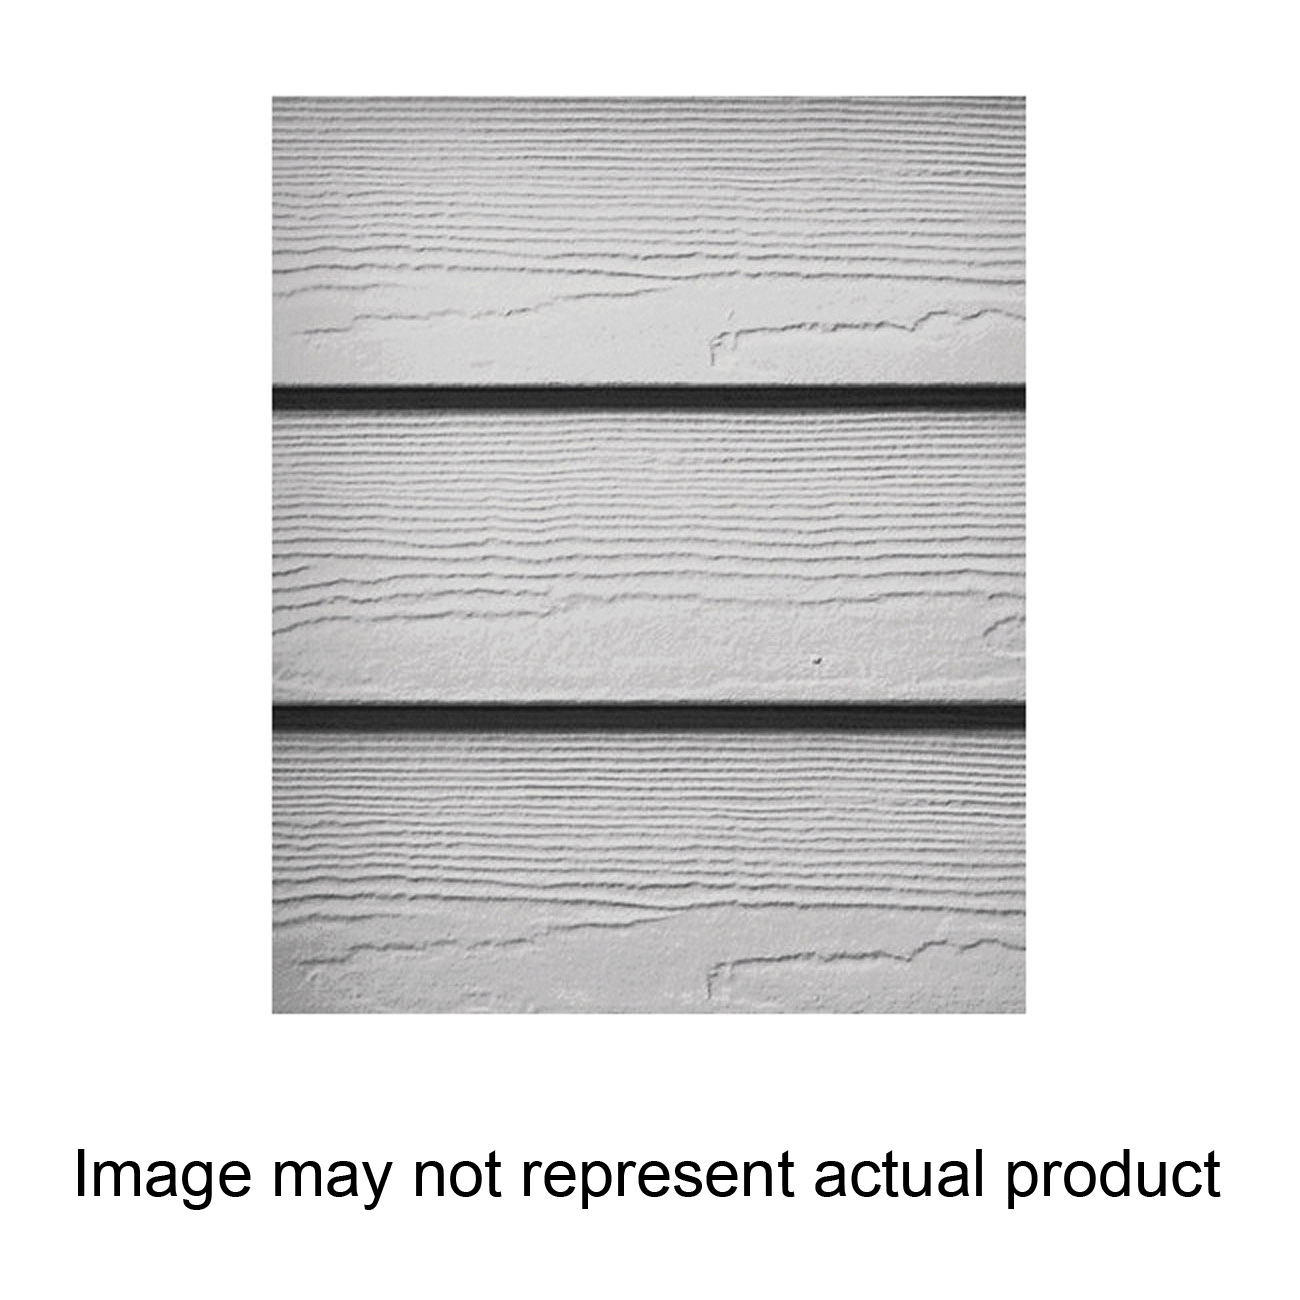 215607 Fiber Cement Lap Siding, Prime-Coated, 12 in W, 144 in L, 0.312 in Thickness